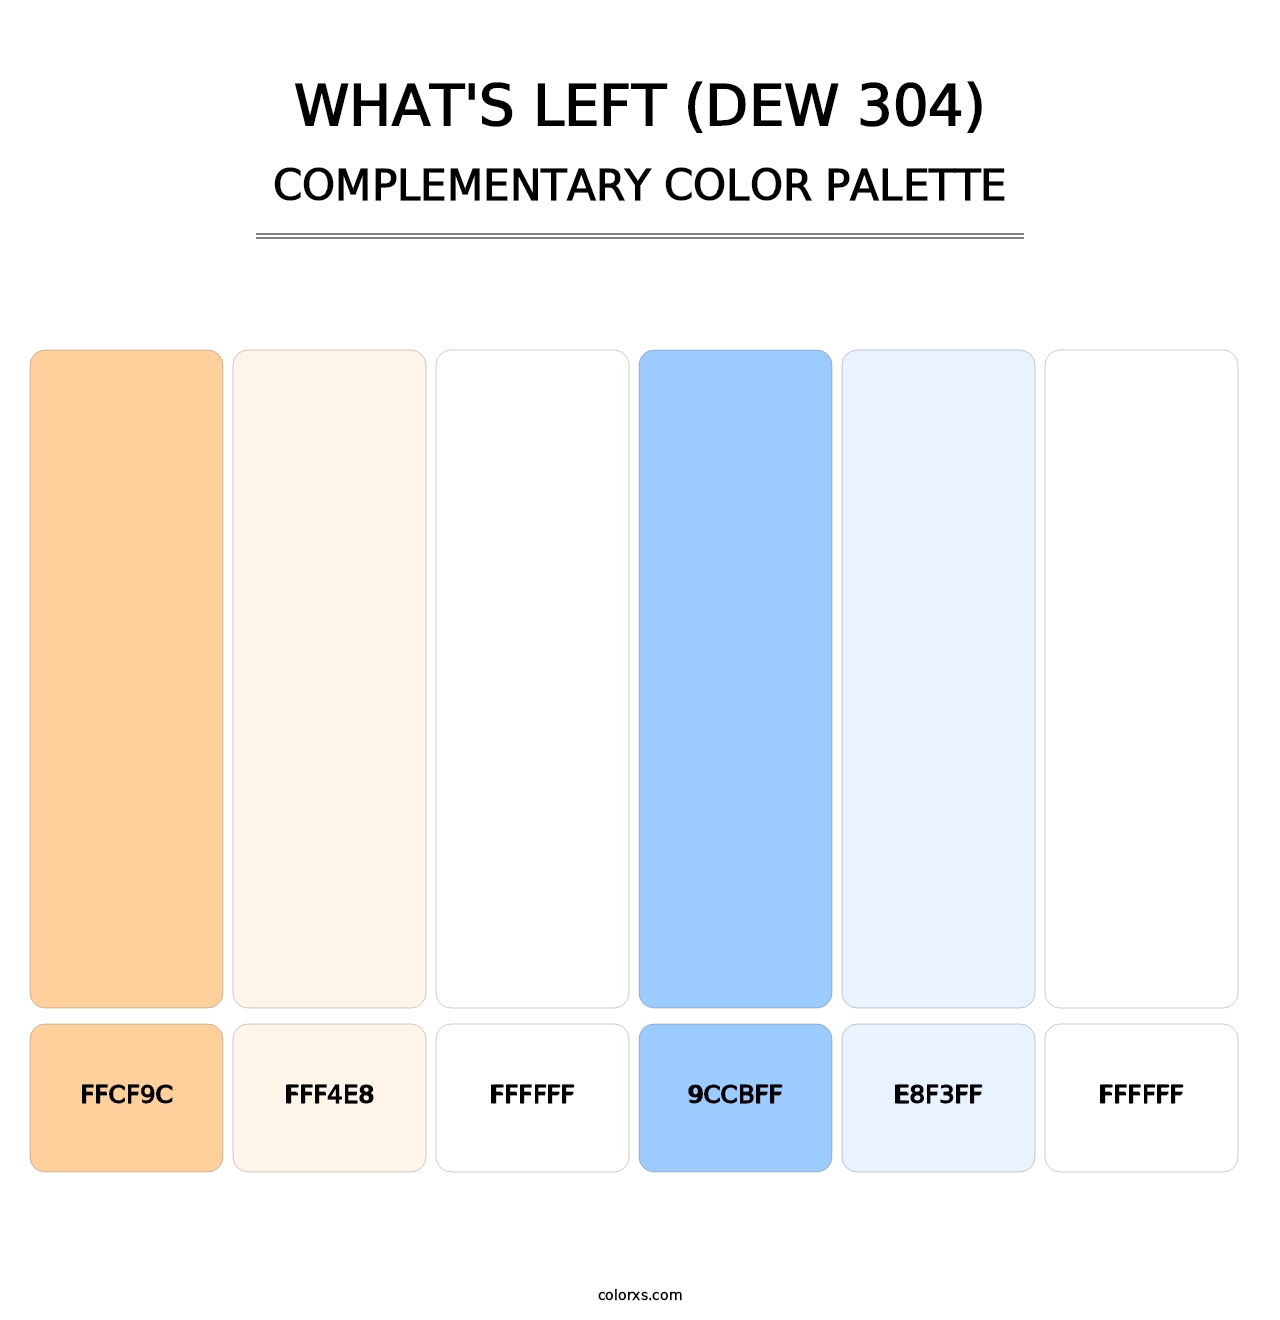 What's Left (DEW 304) - Complementary Color Palette